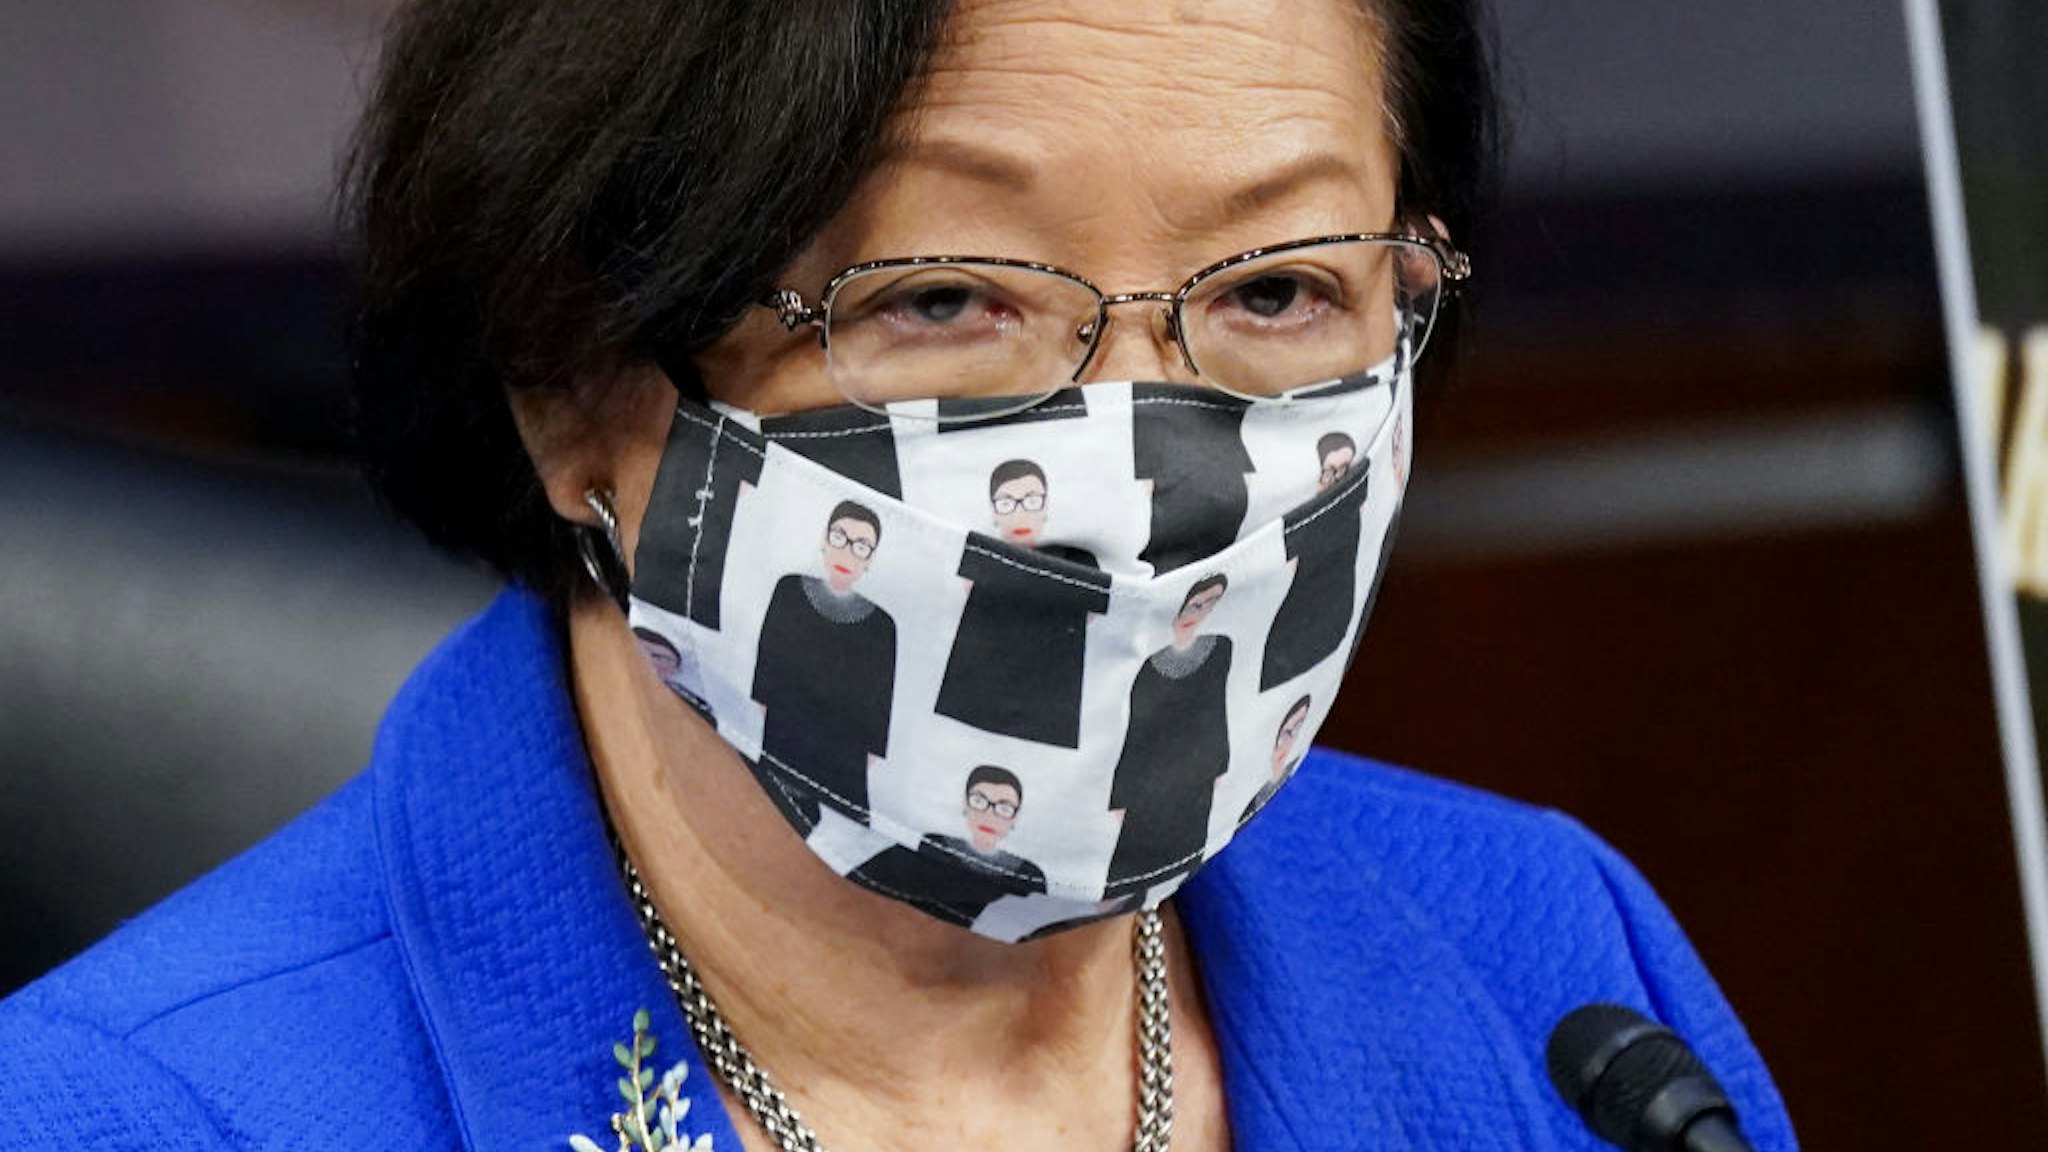 U.S. Sen. Mazi Hirono (D-HI) wears a Ruth Bader Ginsburg face mask during the Senate Judiciary Committee confirmation hearing for Supreme Court Justice on Capitol Hill on October 12, 2020 in Washington, DC.